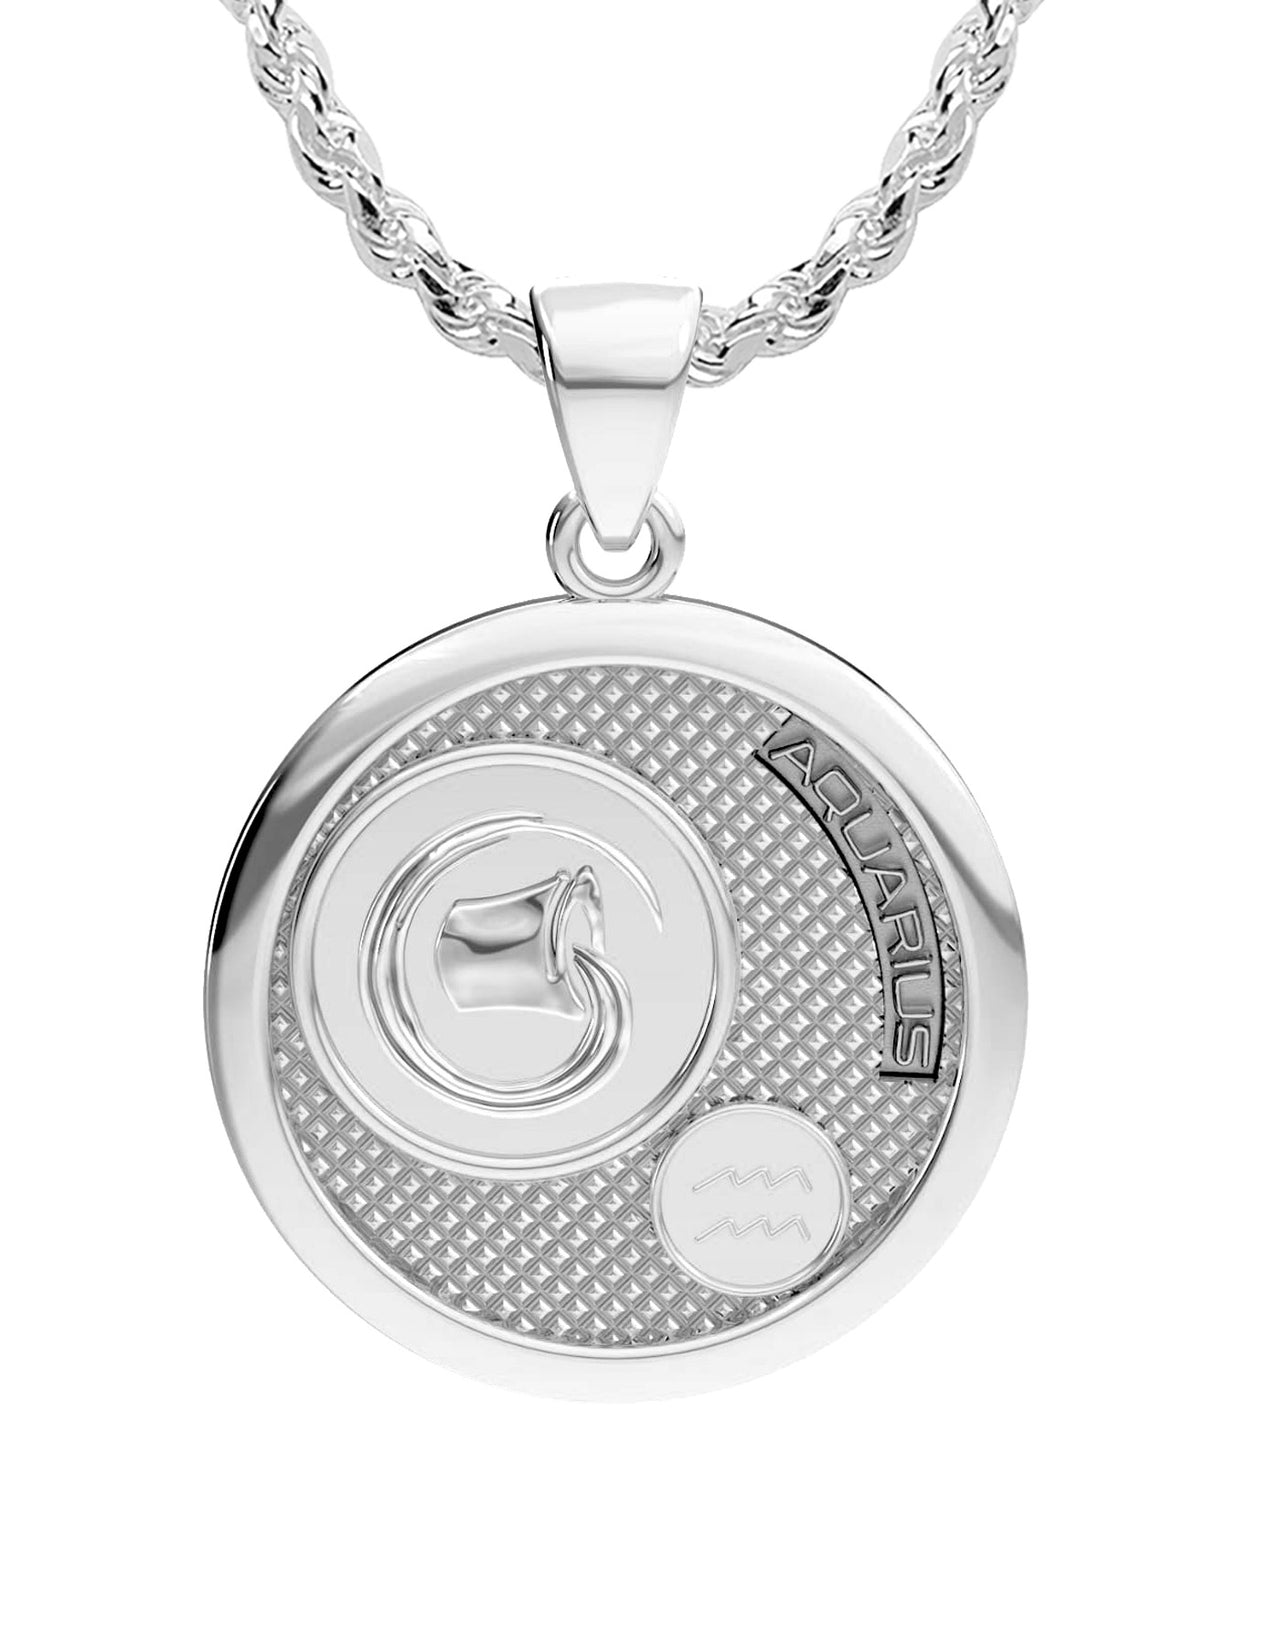 Ladies 925 Sterling Silver Round Aquarius Zodiac Polished Pendant Necklace, 25mm